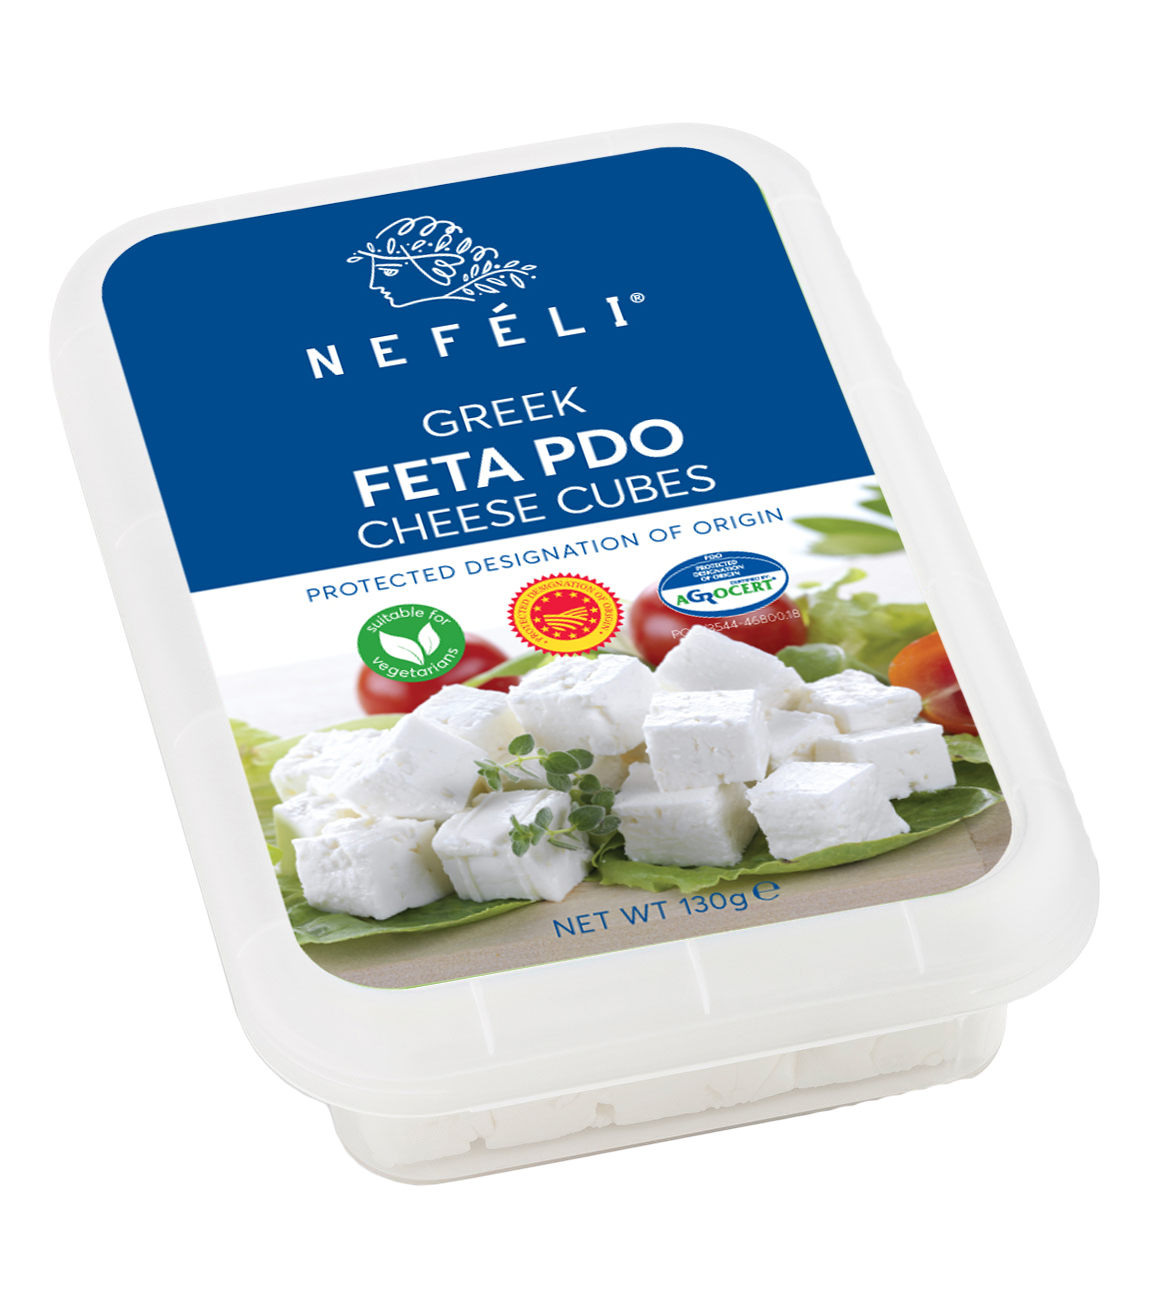 Greek Feta PDO cheese in cubes suitable for Vegetarians